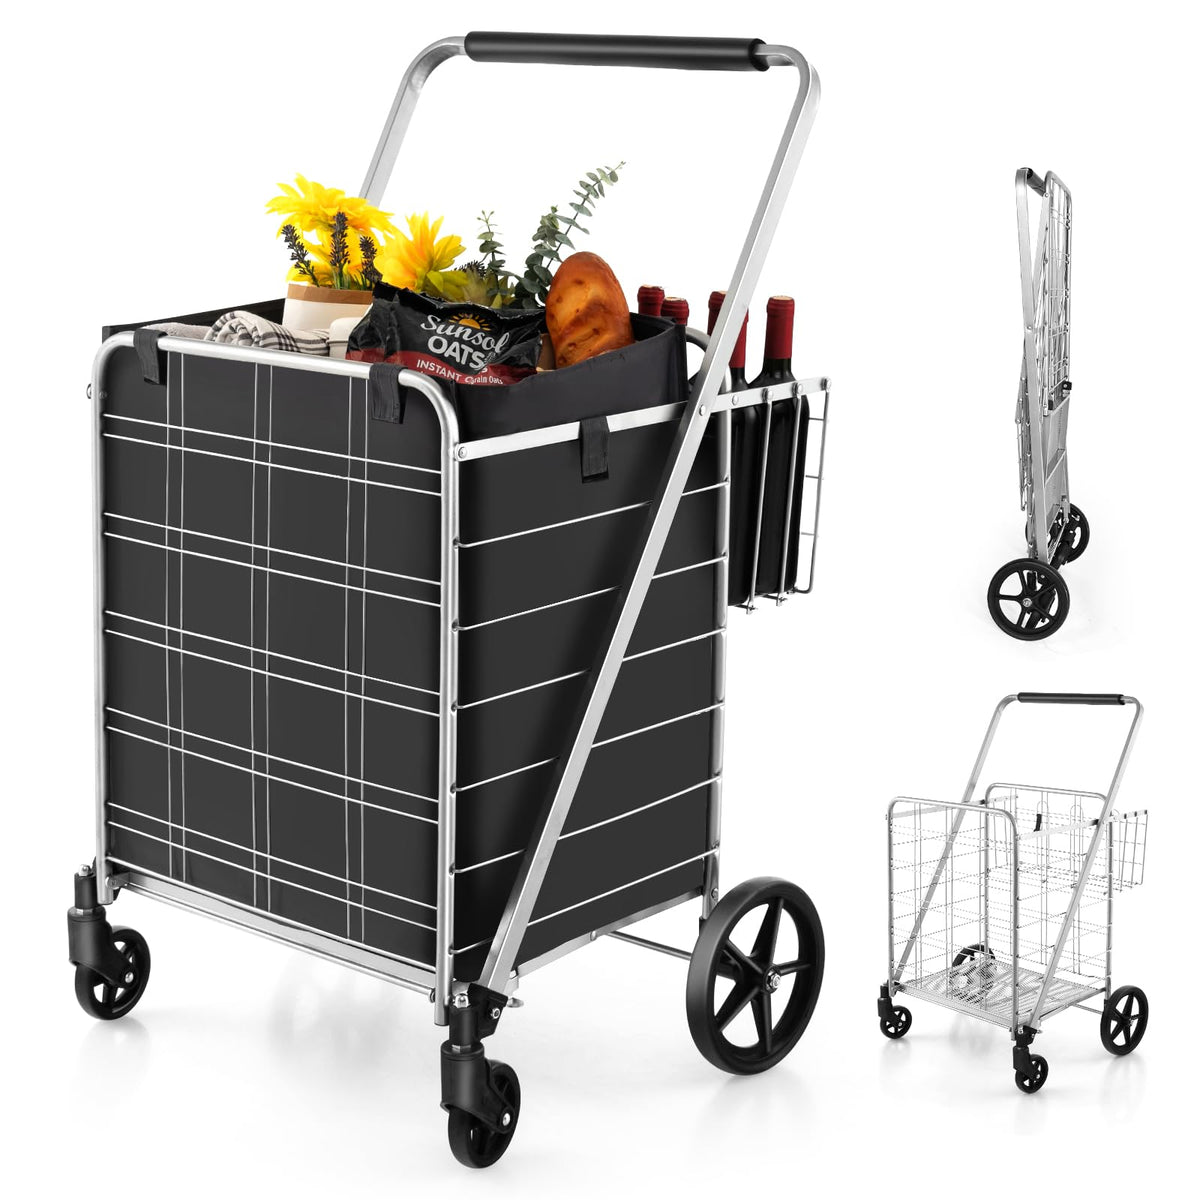 Goplus Shopping Cart for Groceries, Jumbo Upgraded Folding Grocery Cart with Waterproof Liner